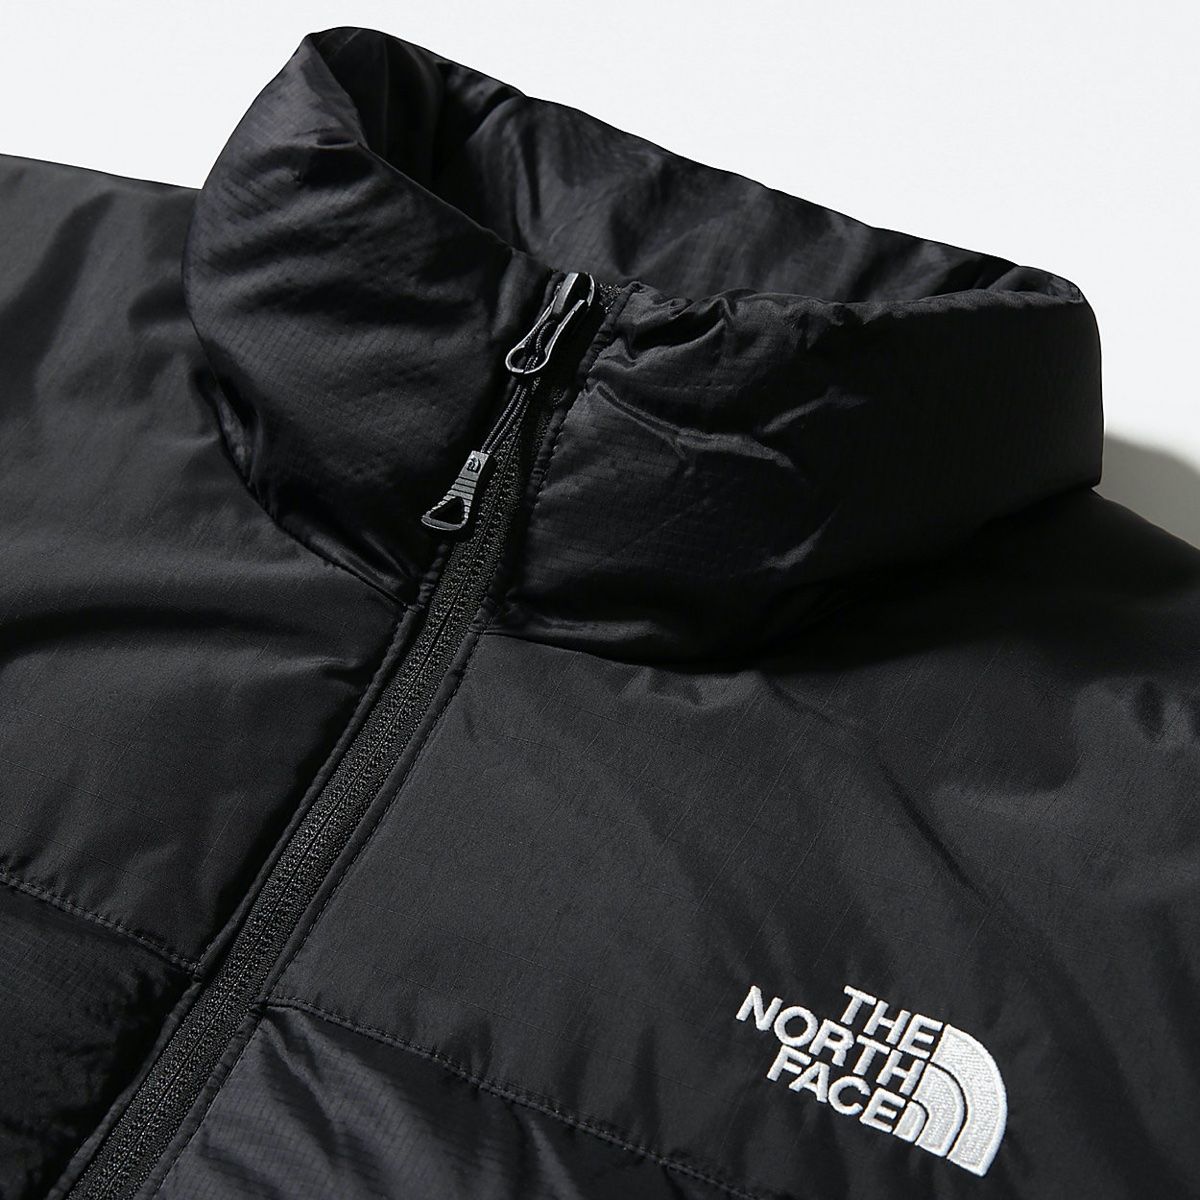 The North Face Diablo Down Insulated Men's Jacket | TNF Black